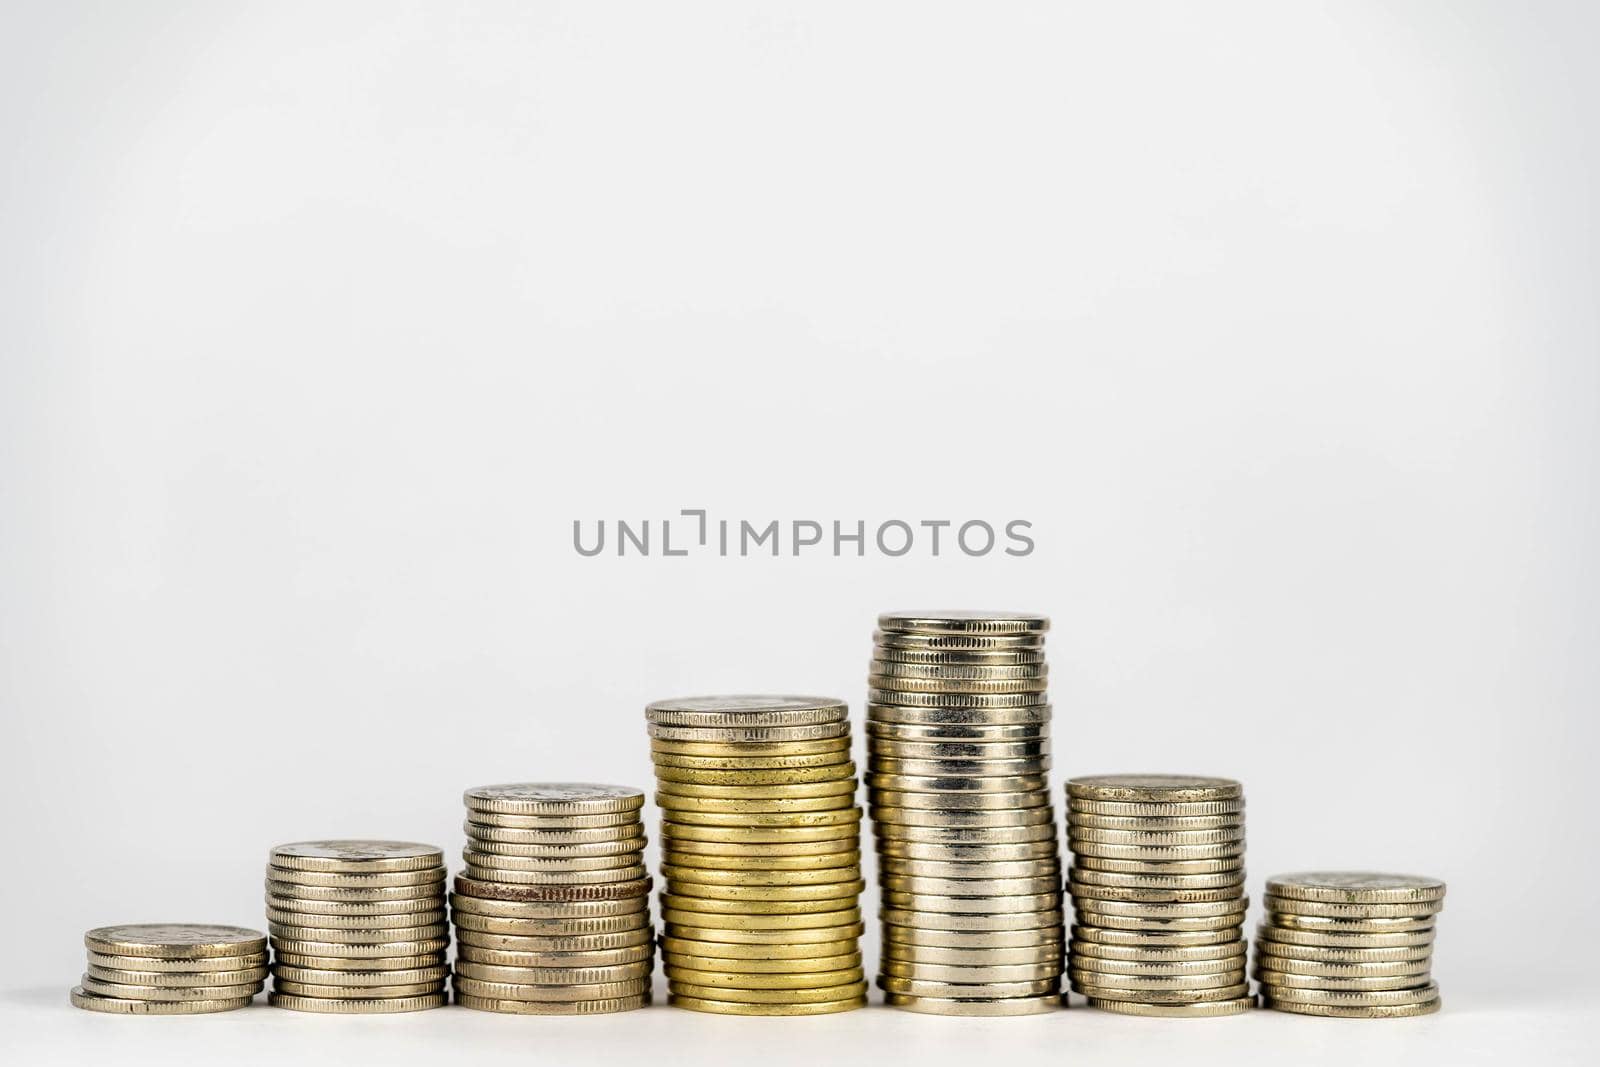 Seven stacks of golden coins with different heights arranged in growing direction, isolated on white background by billroque